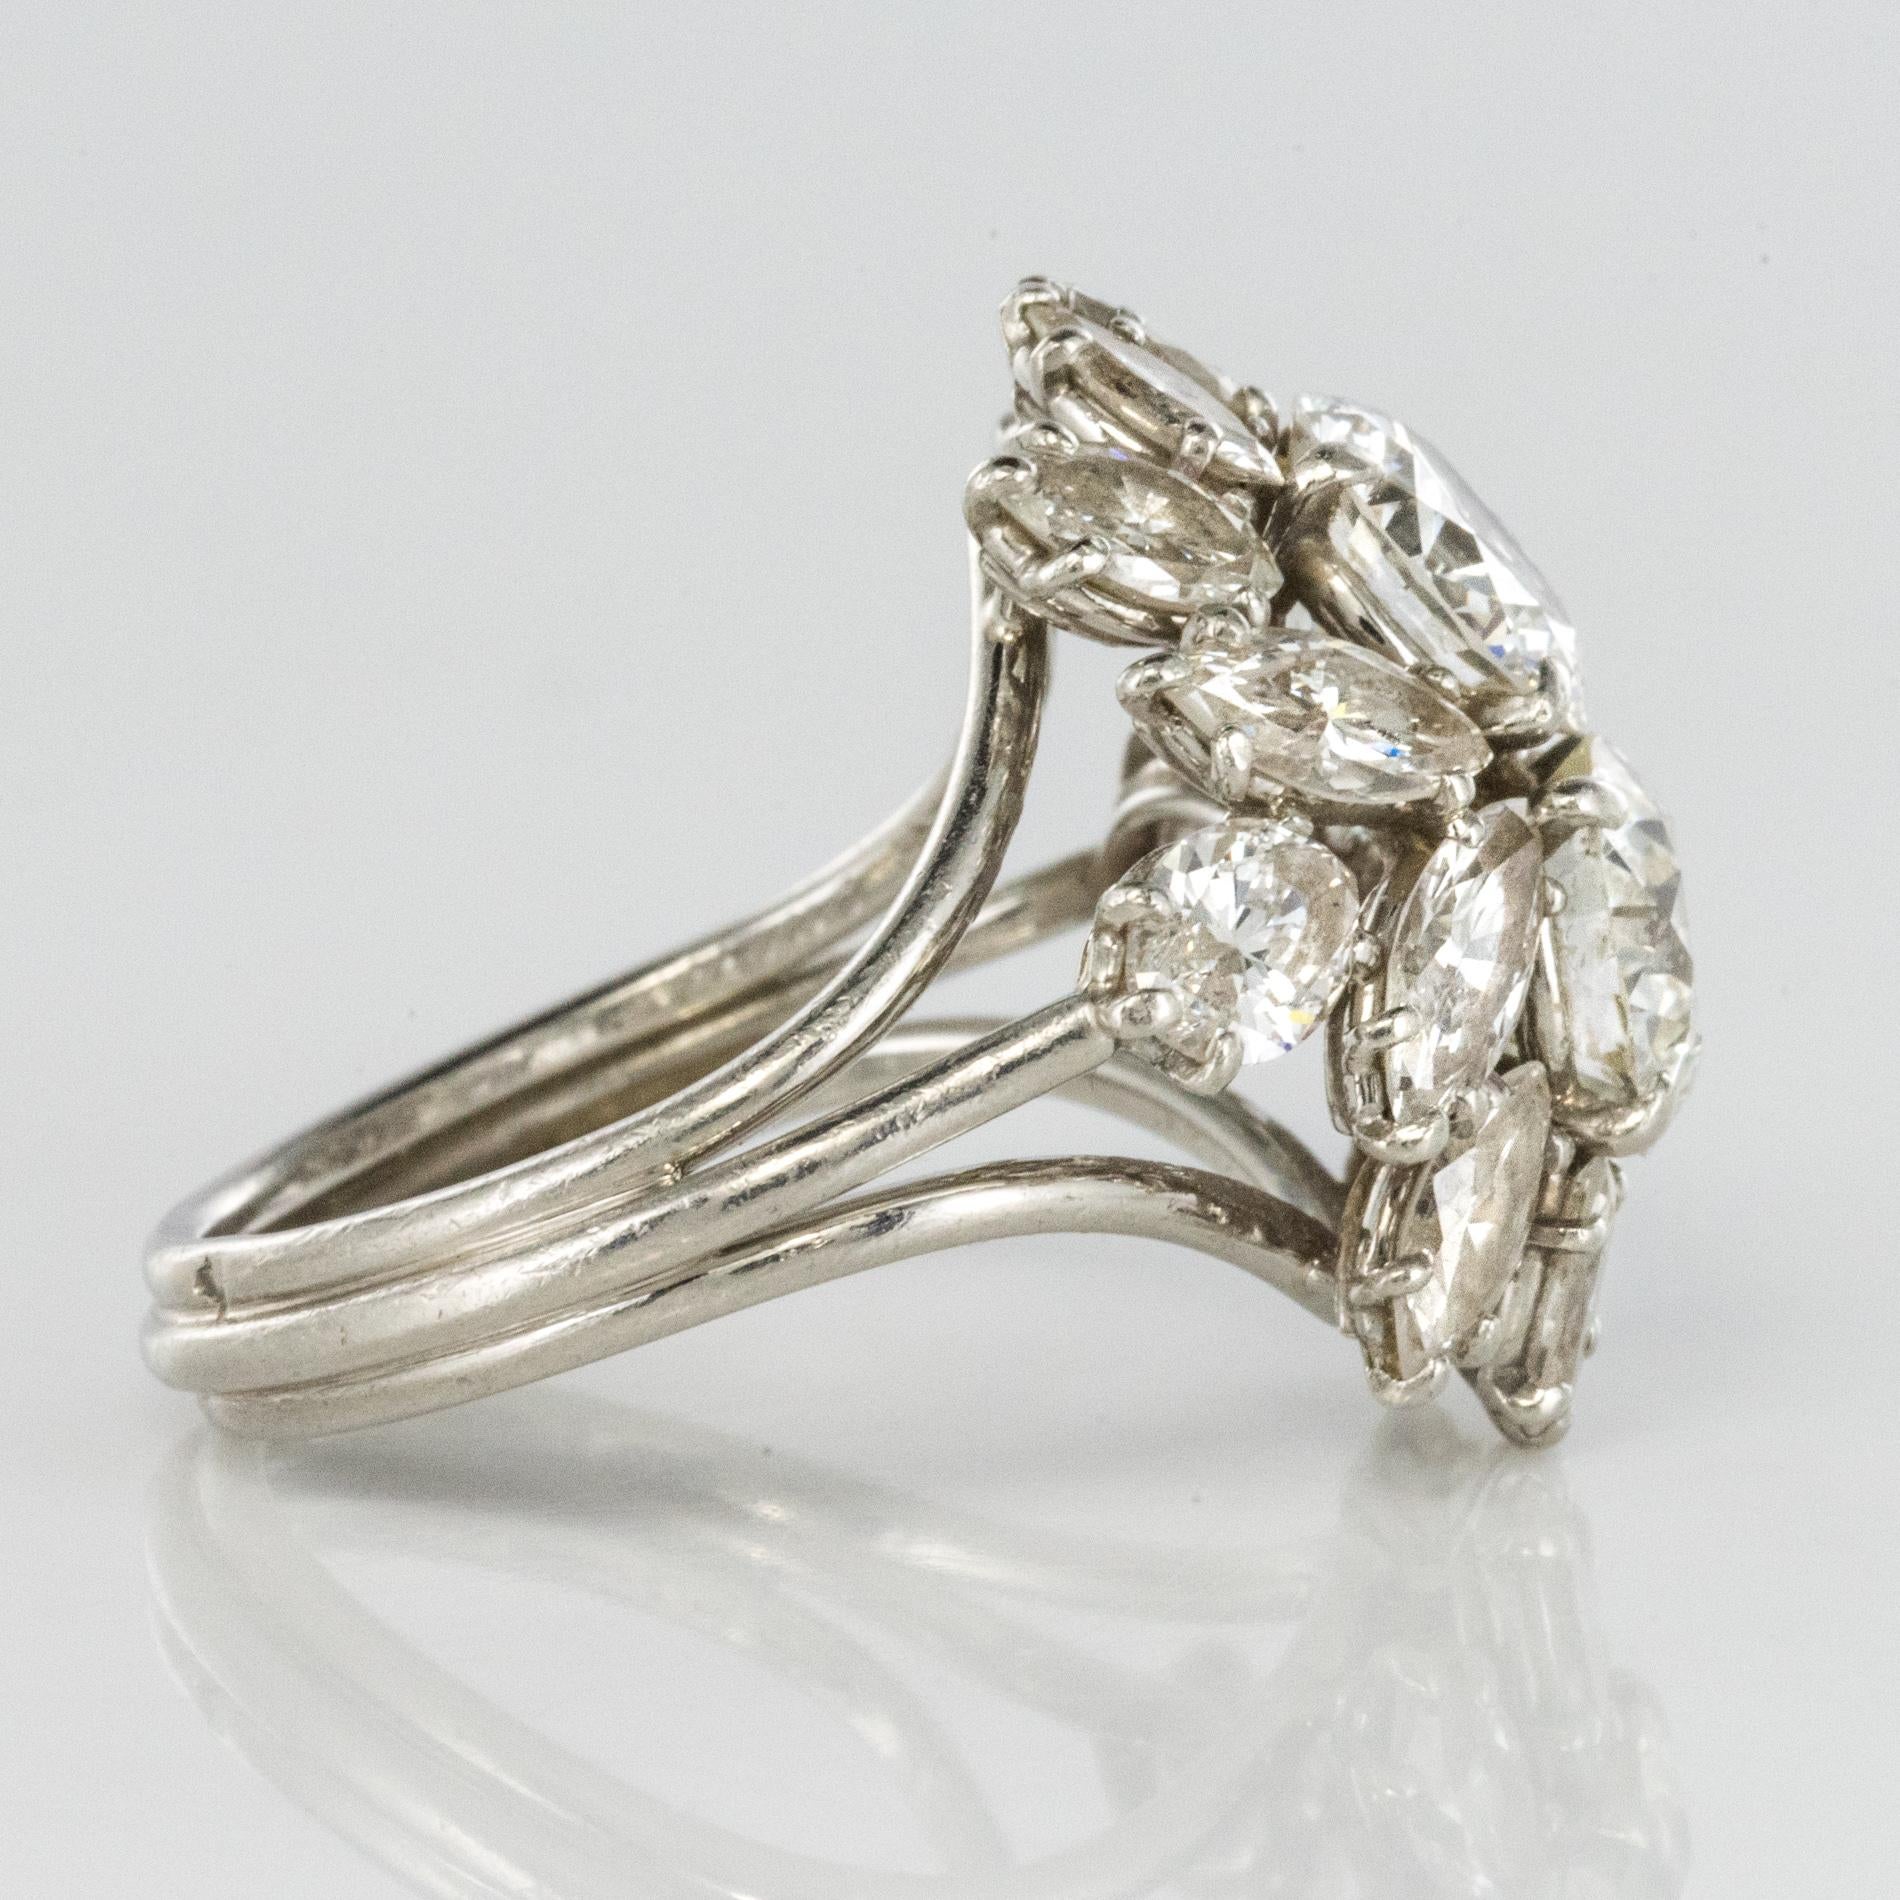 1950s French Cartier 7 Carat Diamond Platinum Ring For Sale 6